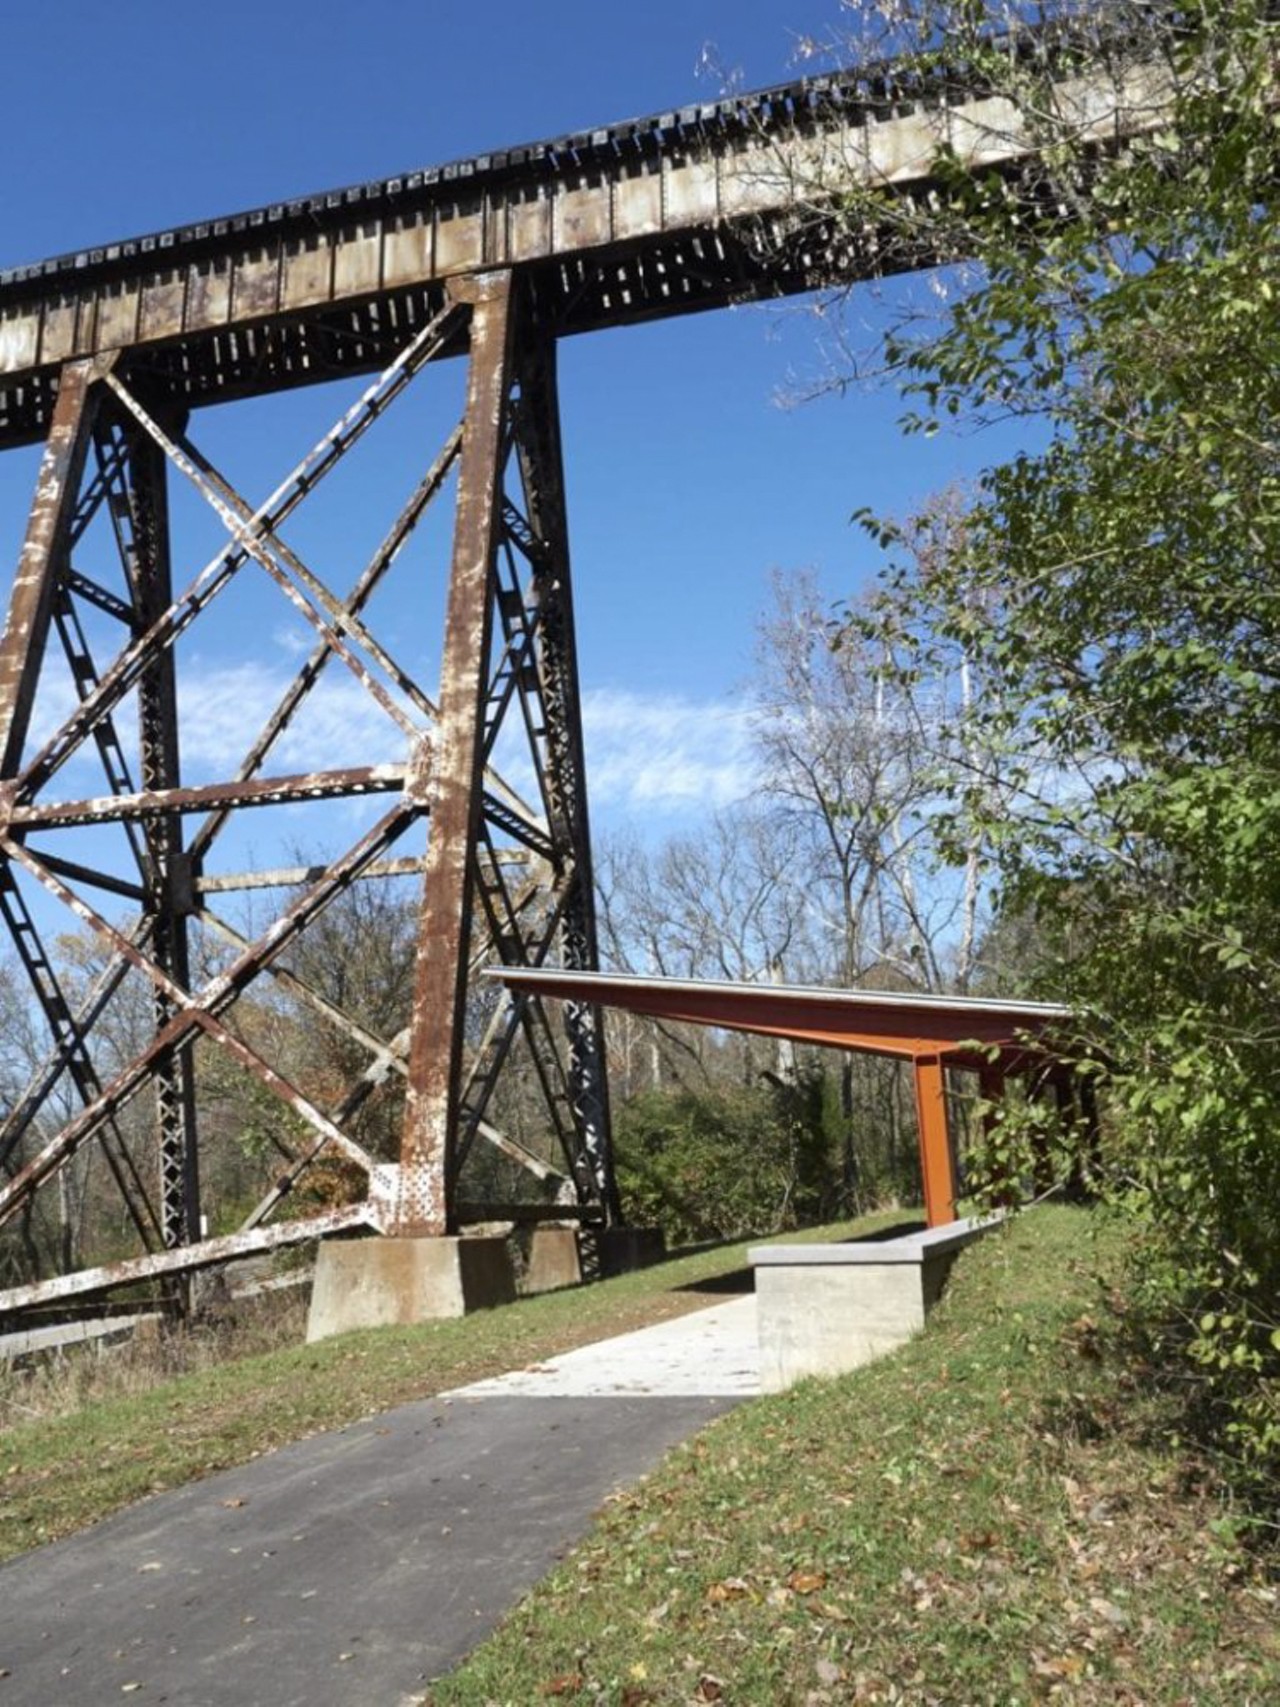 Pope Lick Park Trestles 
4002 S. Pope Lick Rd. 
Many claim to have seen the Pope Lick Monster at the train trestle in Pope Lick Park.  The monster, half-man and half-goat, is a Louisville legend. Photo via  The Parklands of Floyds Fork